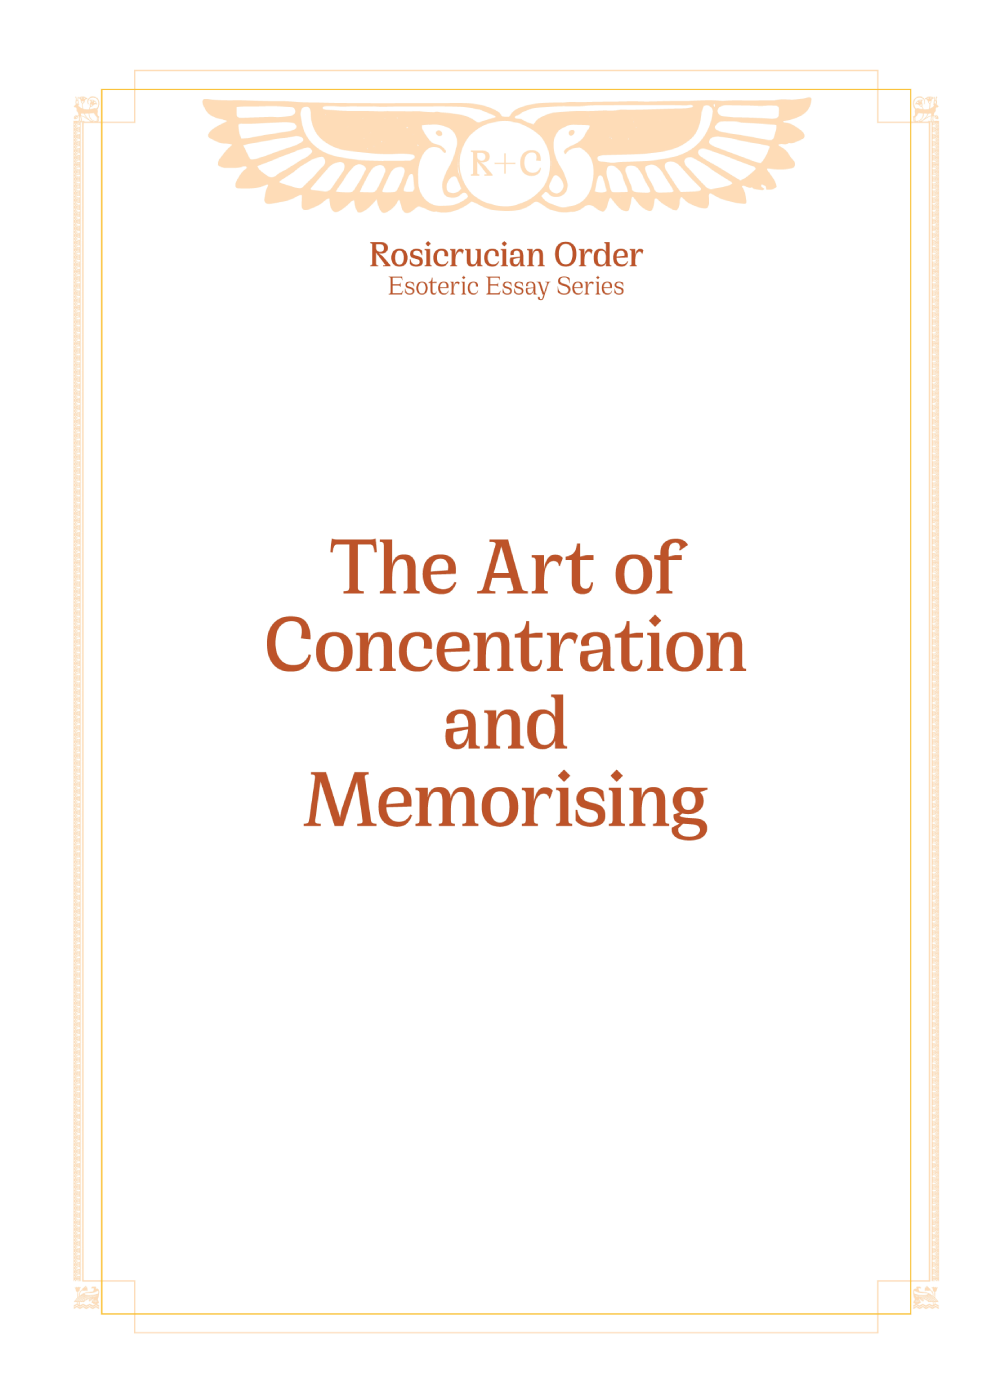 Esoteric Essays - Art of Concentration and Memorising